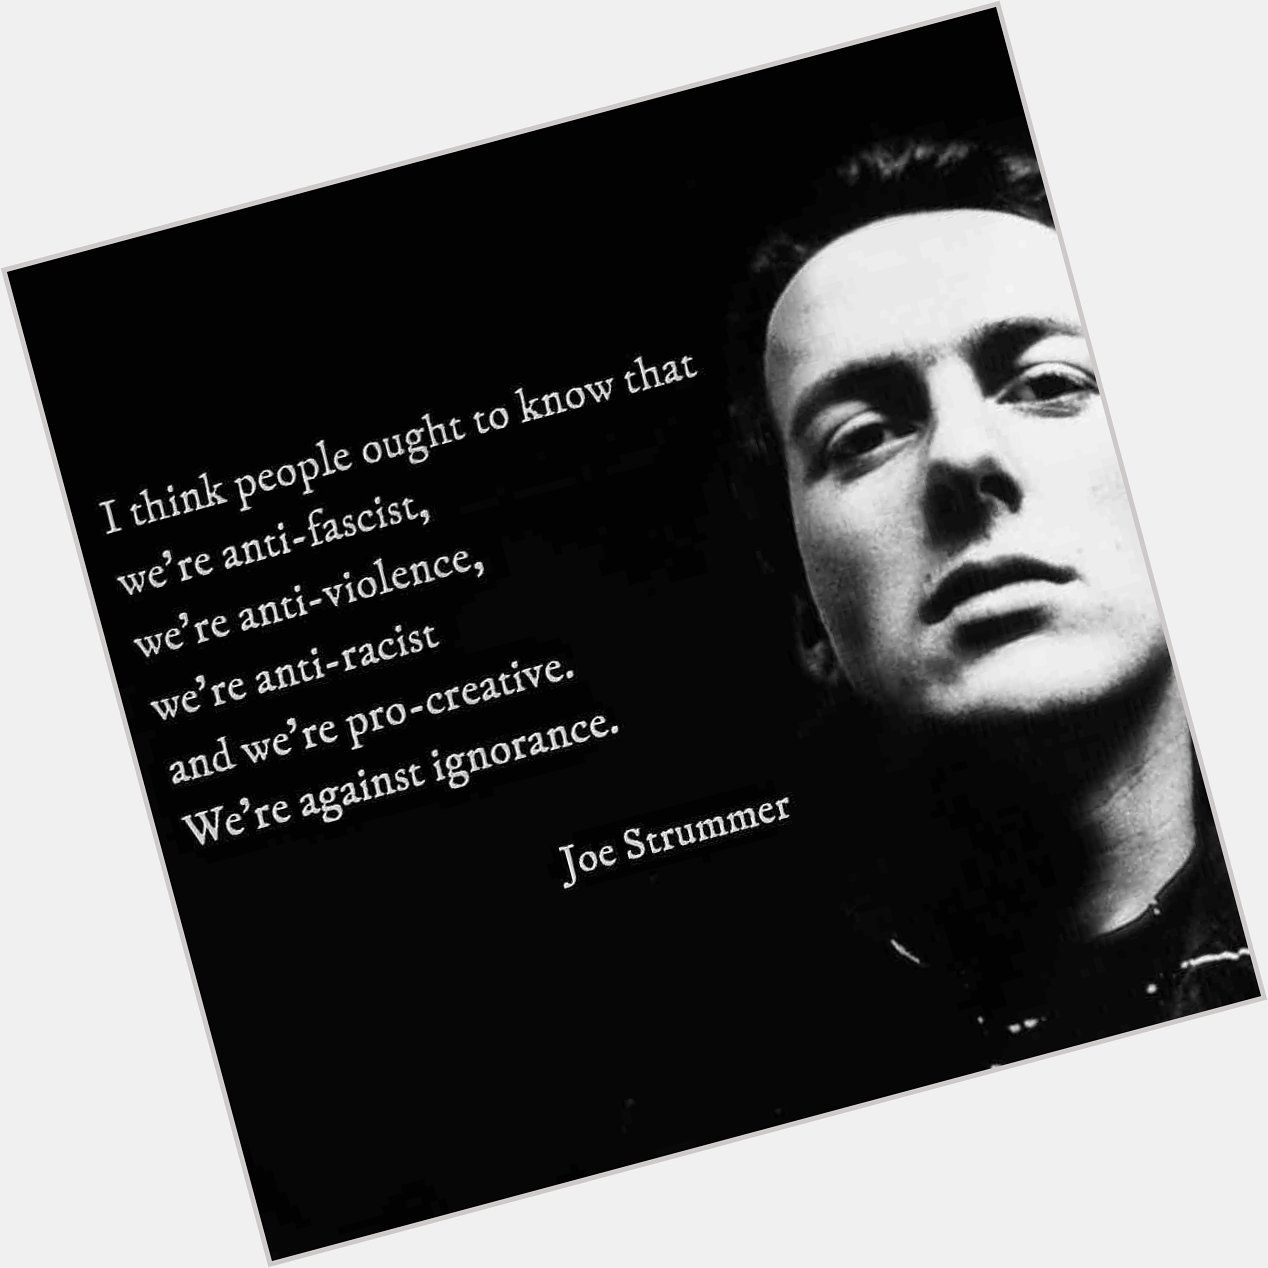 Happy birthday to the late, great Joe Strummer. Through music you live forever. 